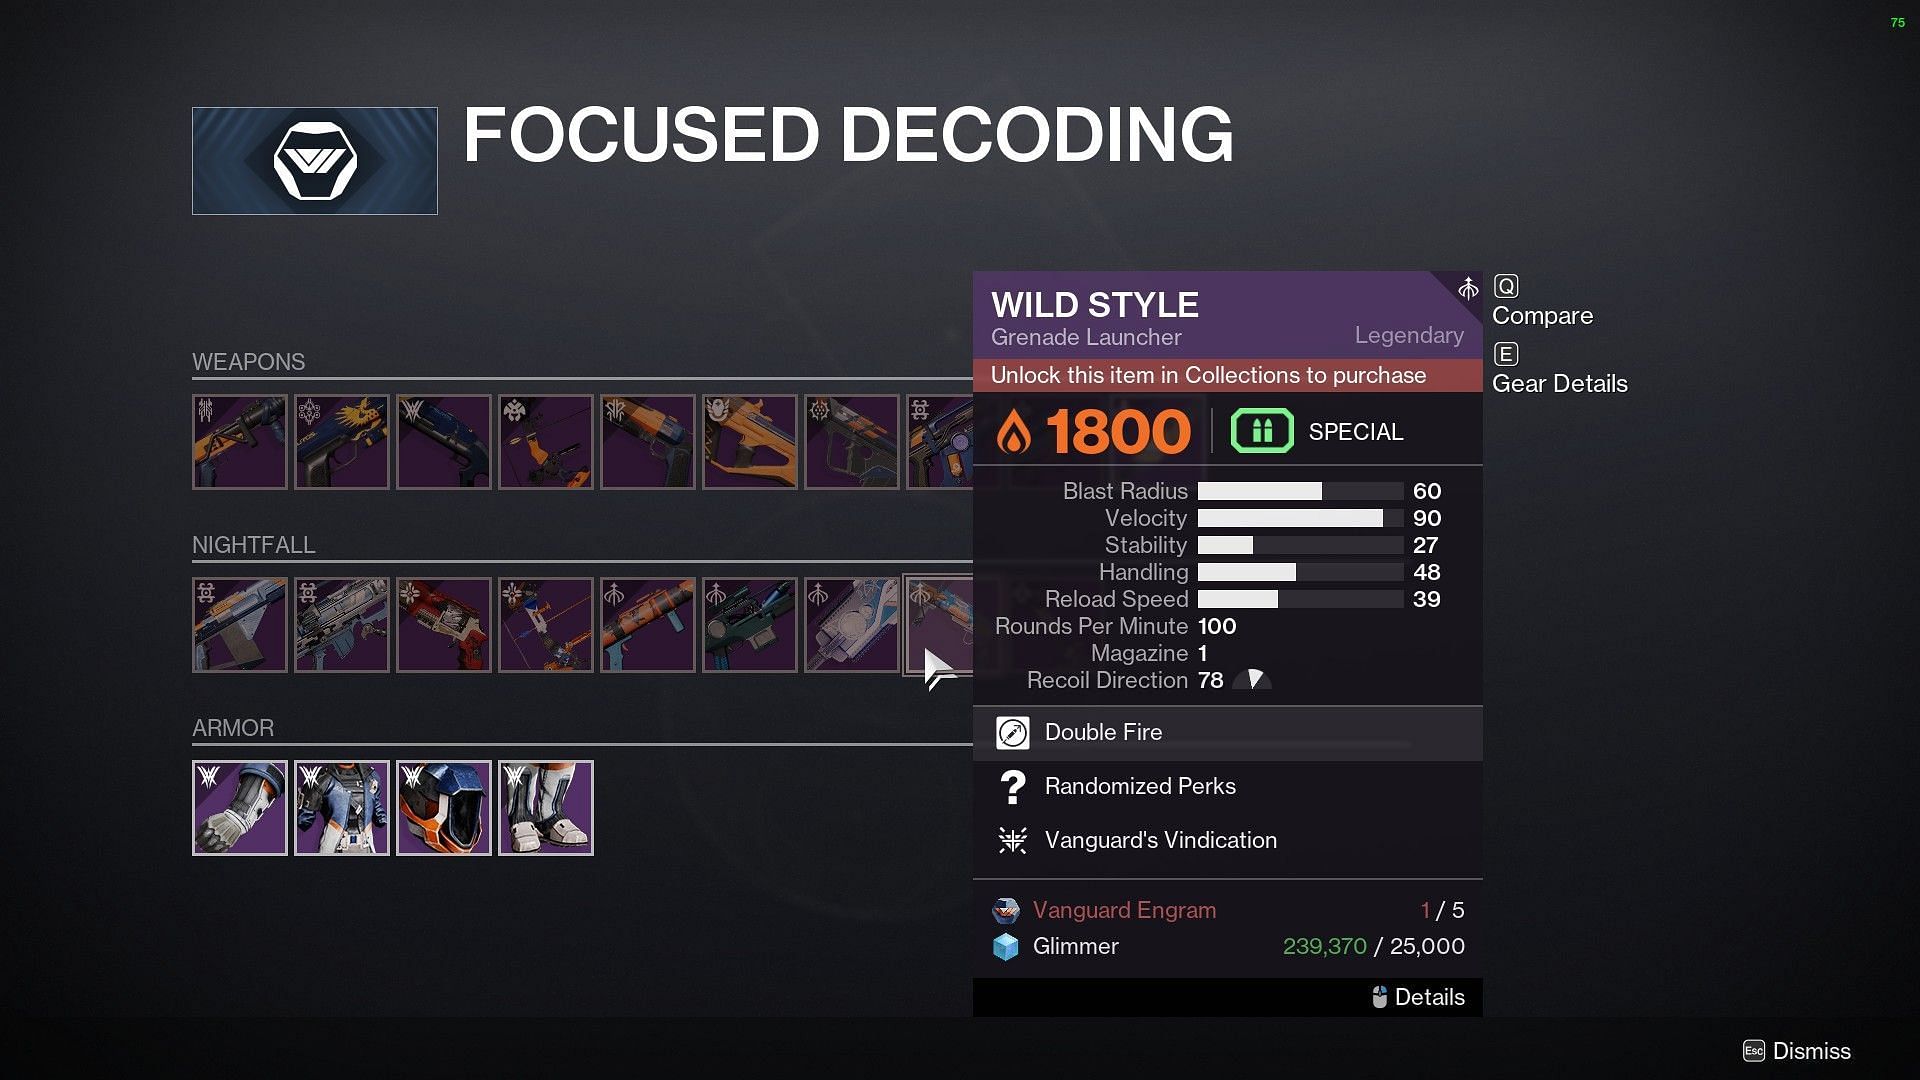 Wild Style in Focused Decoding page of Destiny 2 (Image via Bungie)